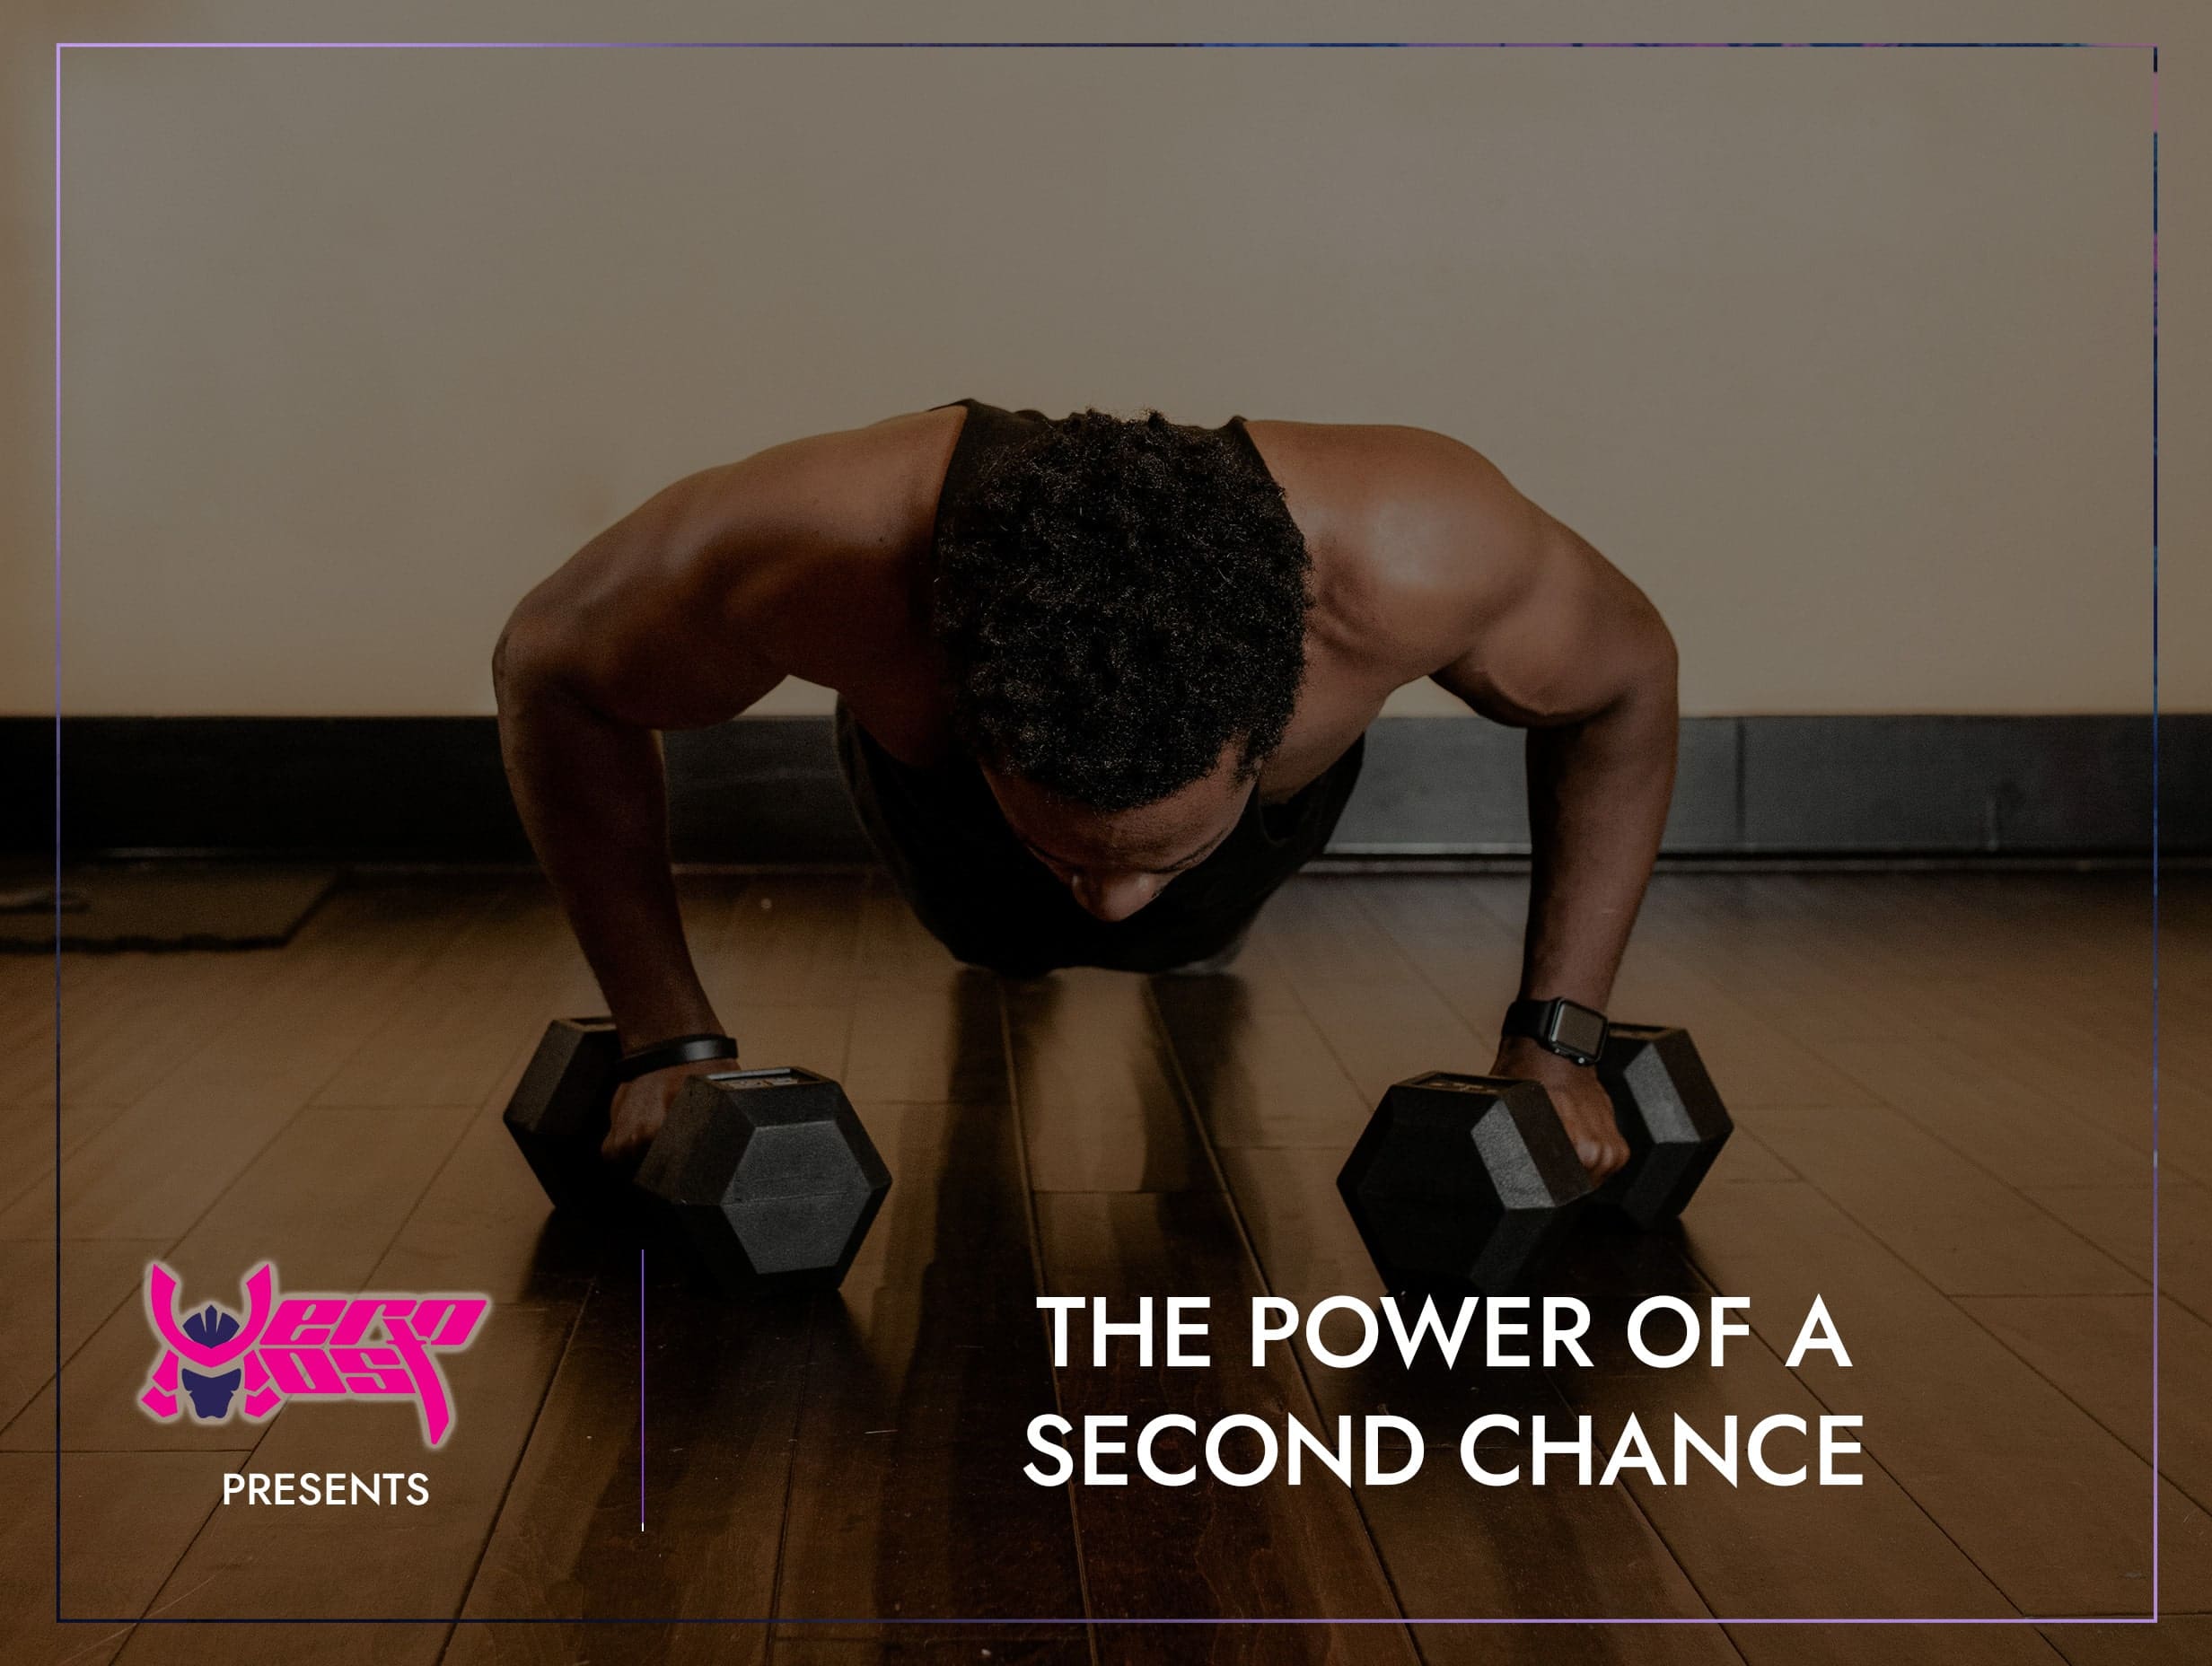 The Power of a Second Chance